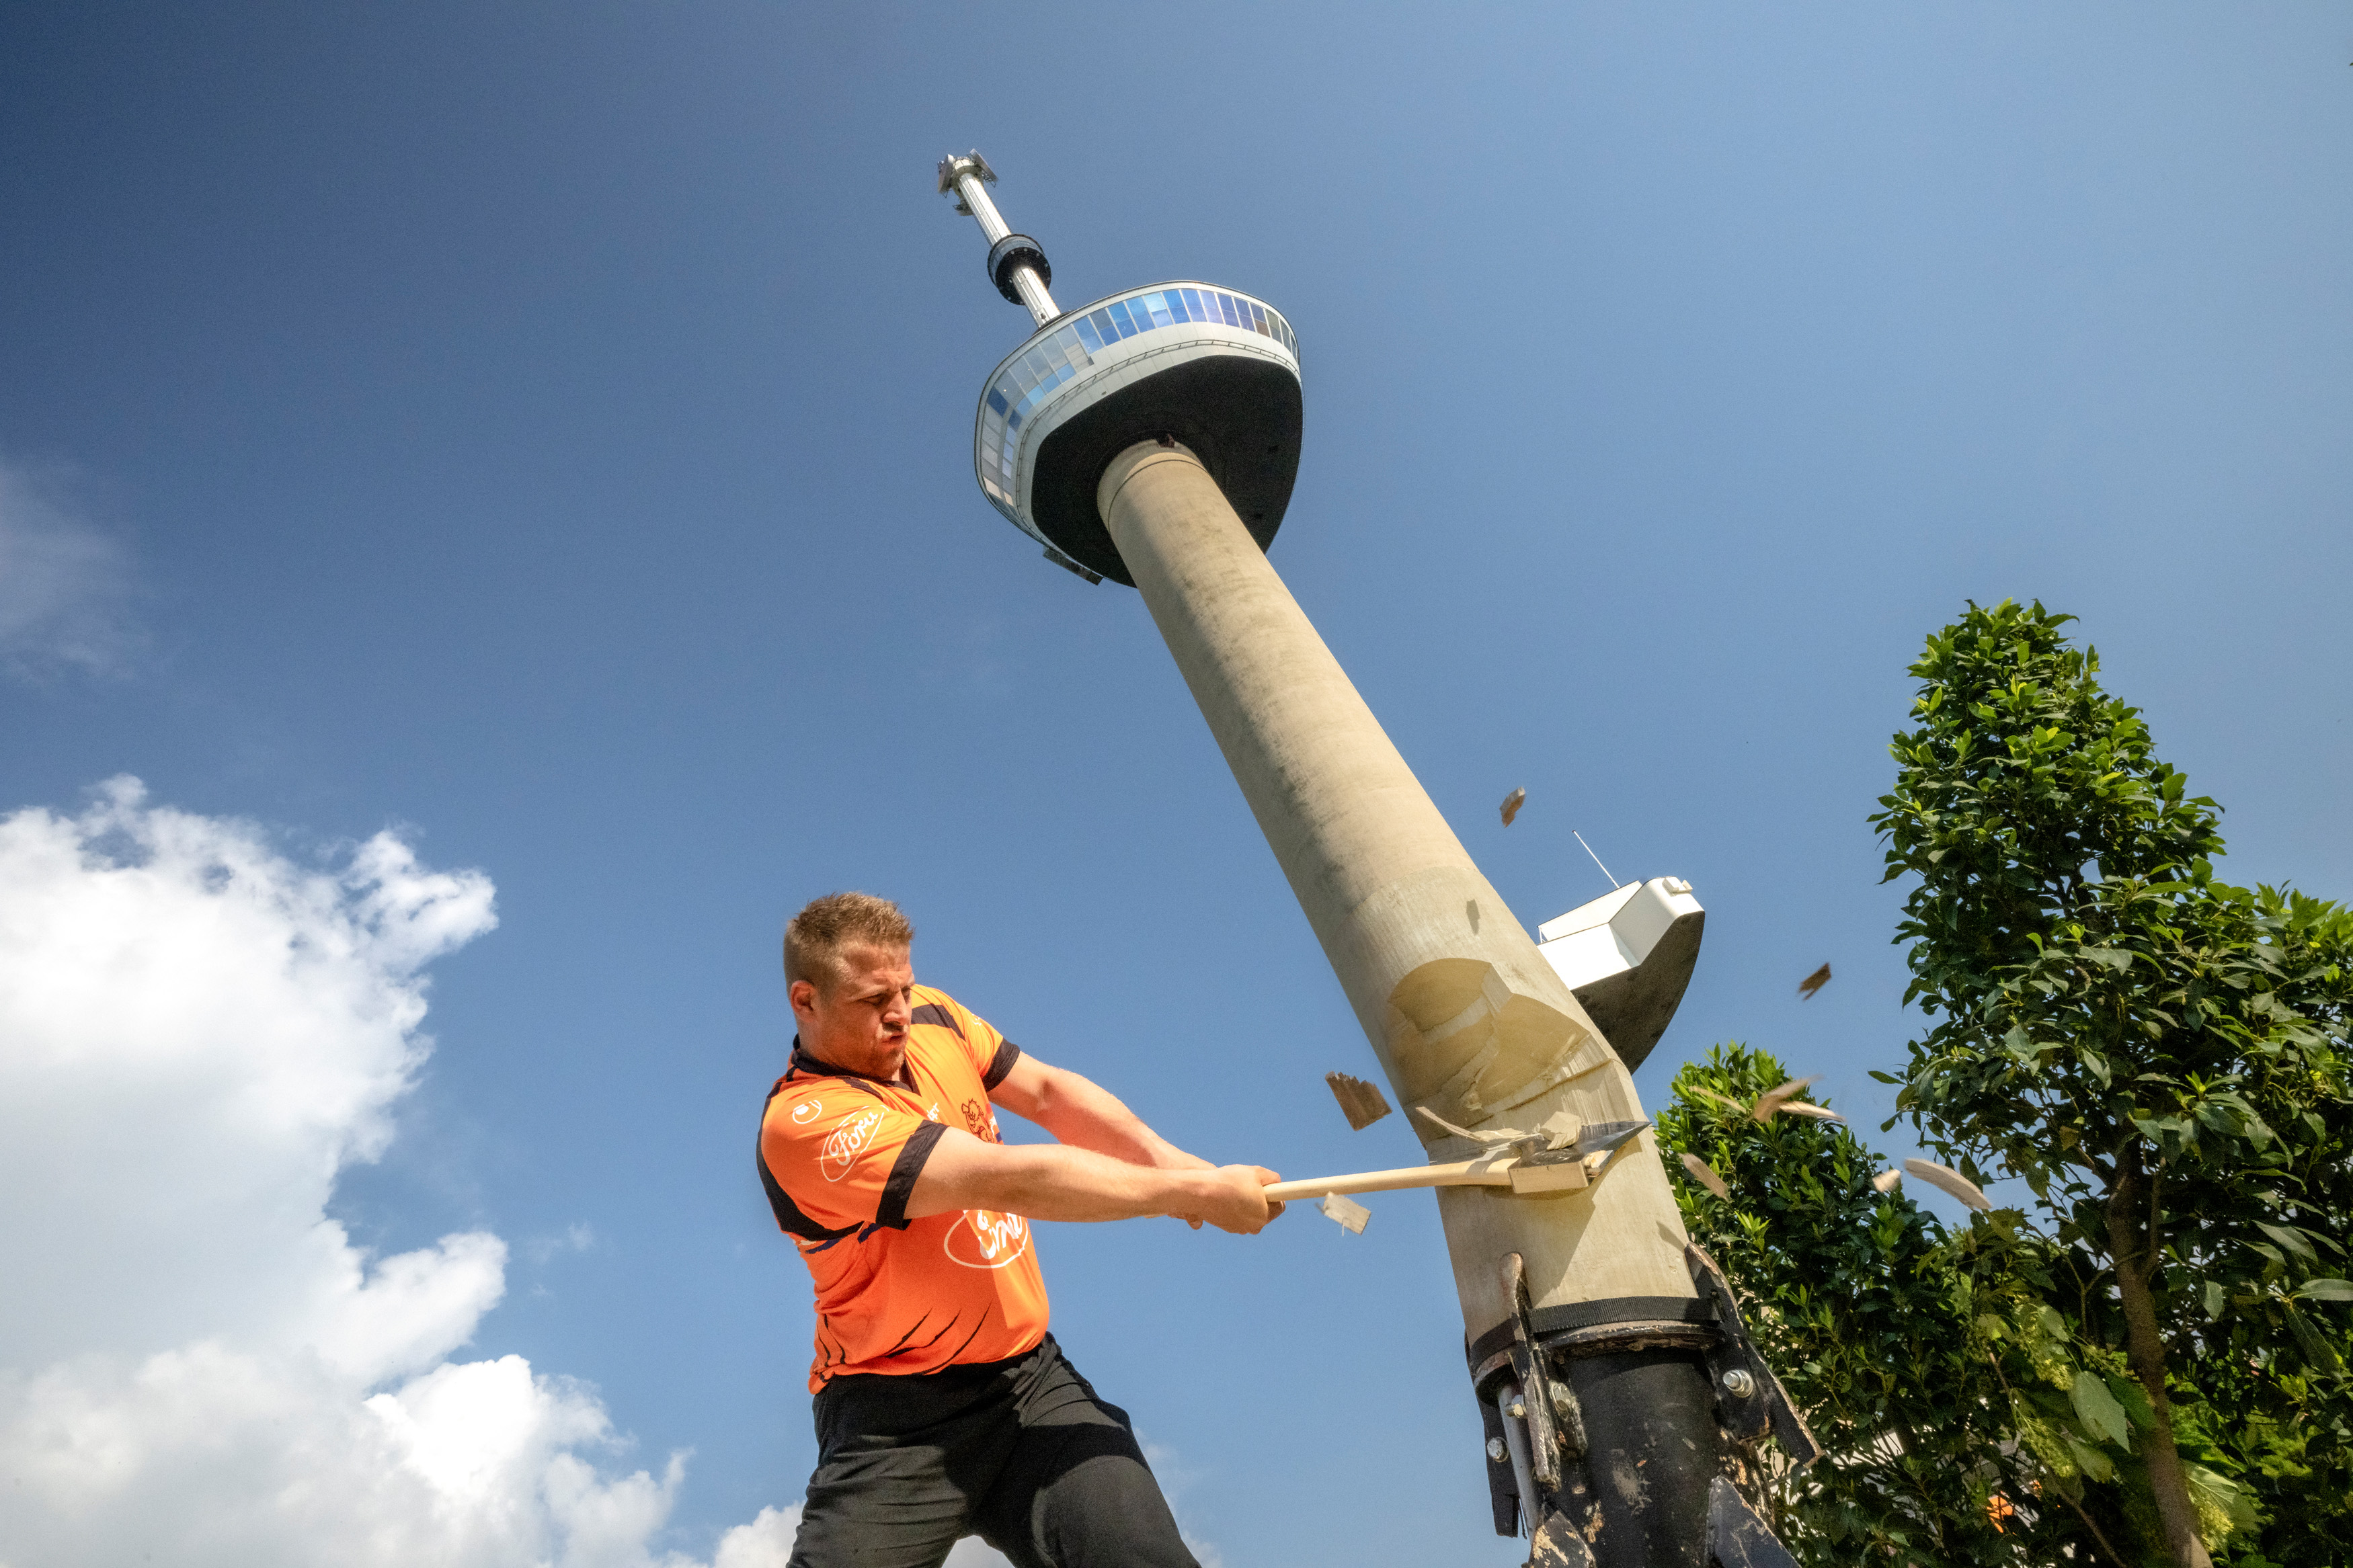 The Netherlands’ Redmer Knol has the hopes of the home fans in his firm grip. He is pictured here getting into competition mode by showing his ‘chops’ on Rotterdam’s famous Euromast Tower 